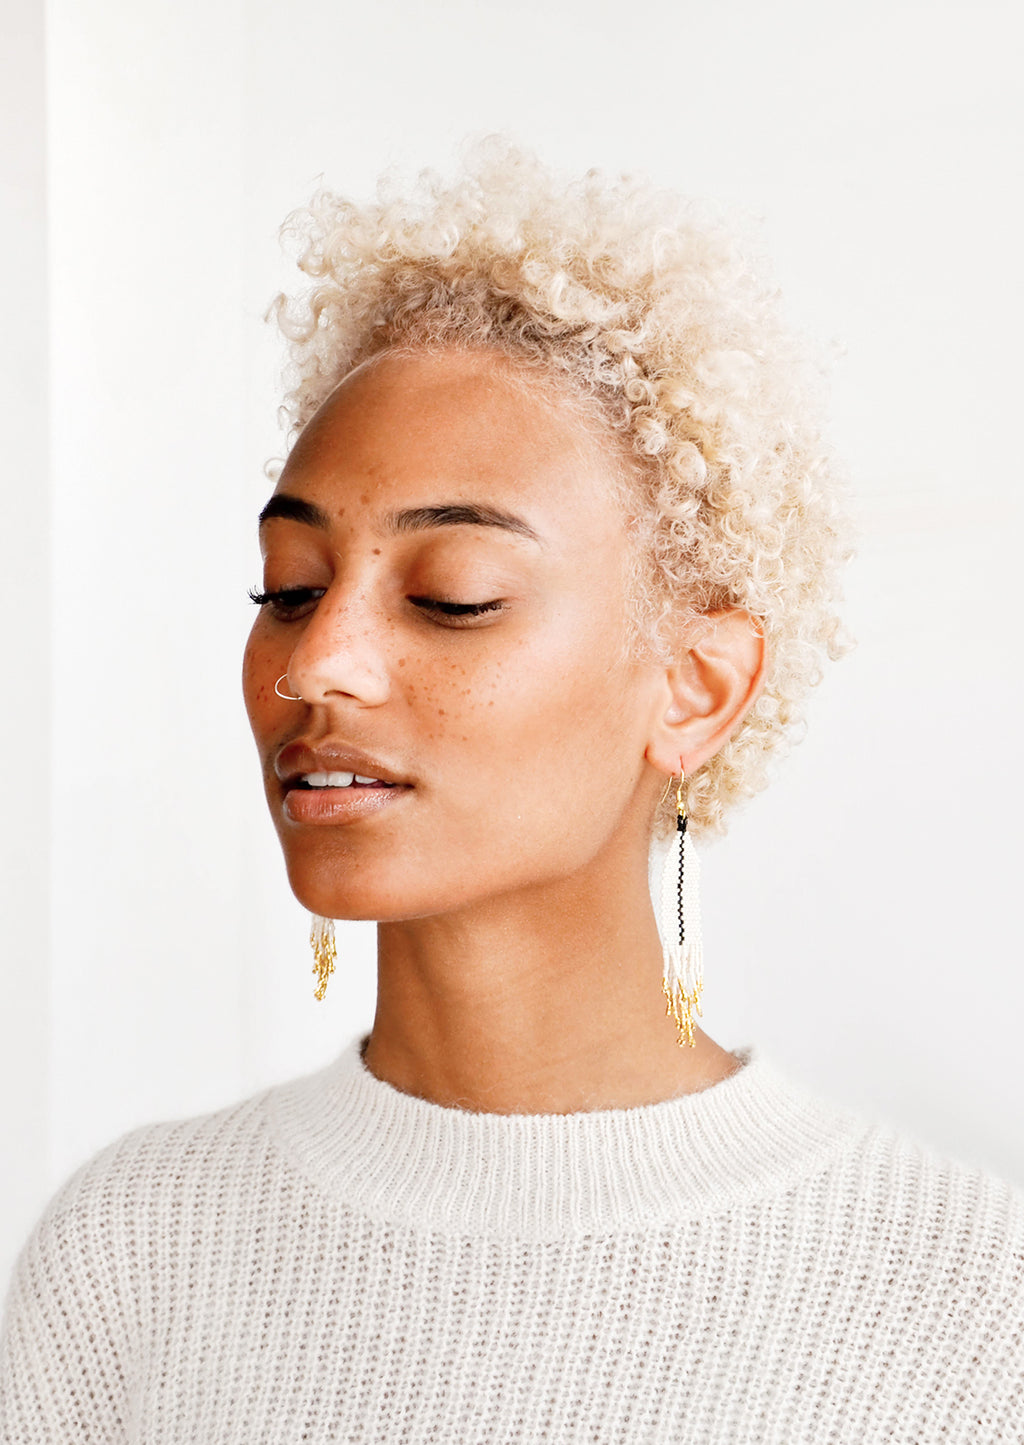 3: Model shot featuring woman wearing earrings and white top.